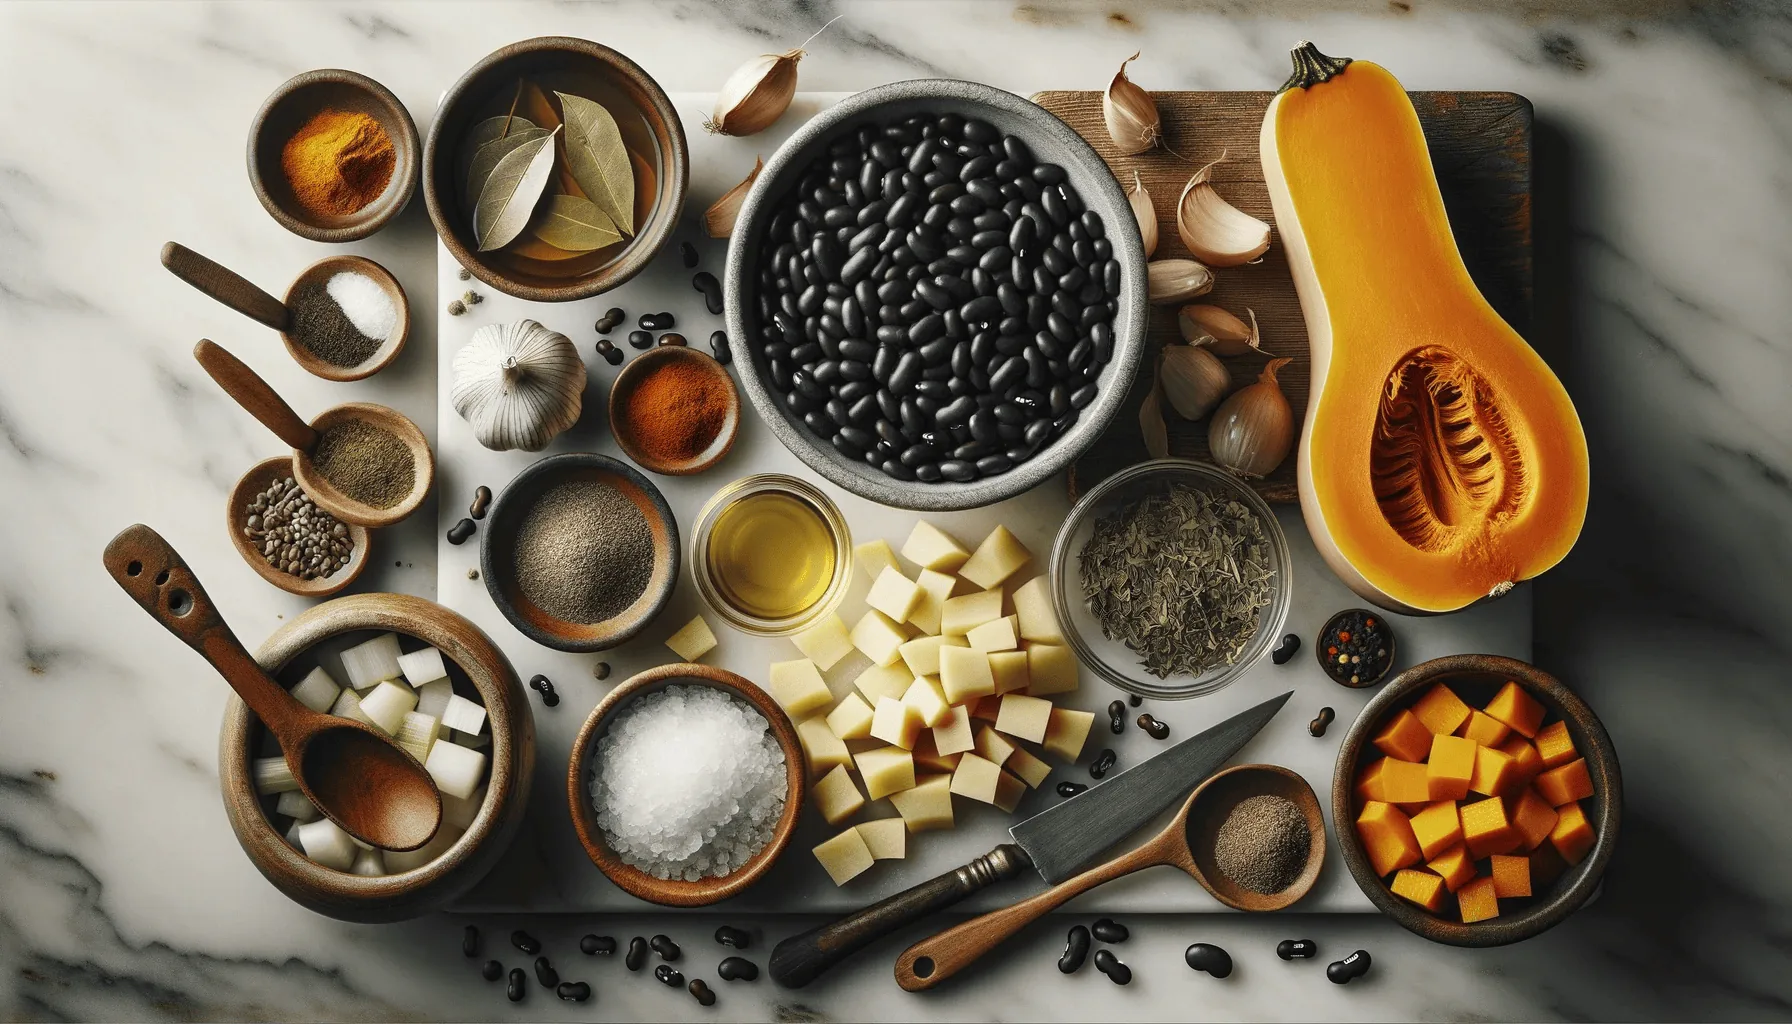 The ingredients for my black bean butternut squash stew recipe